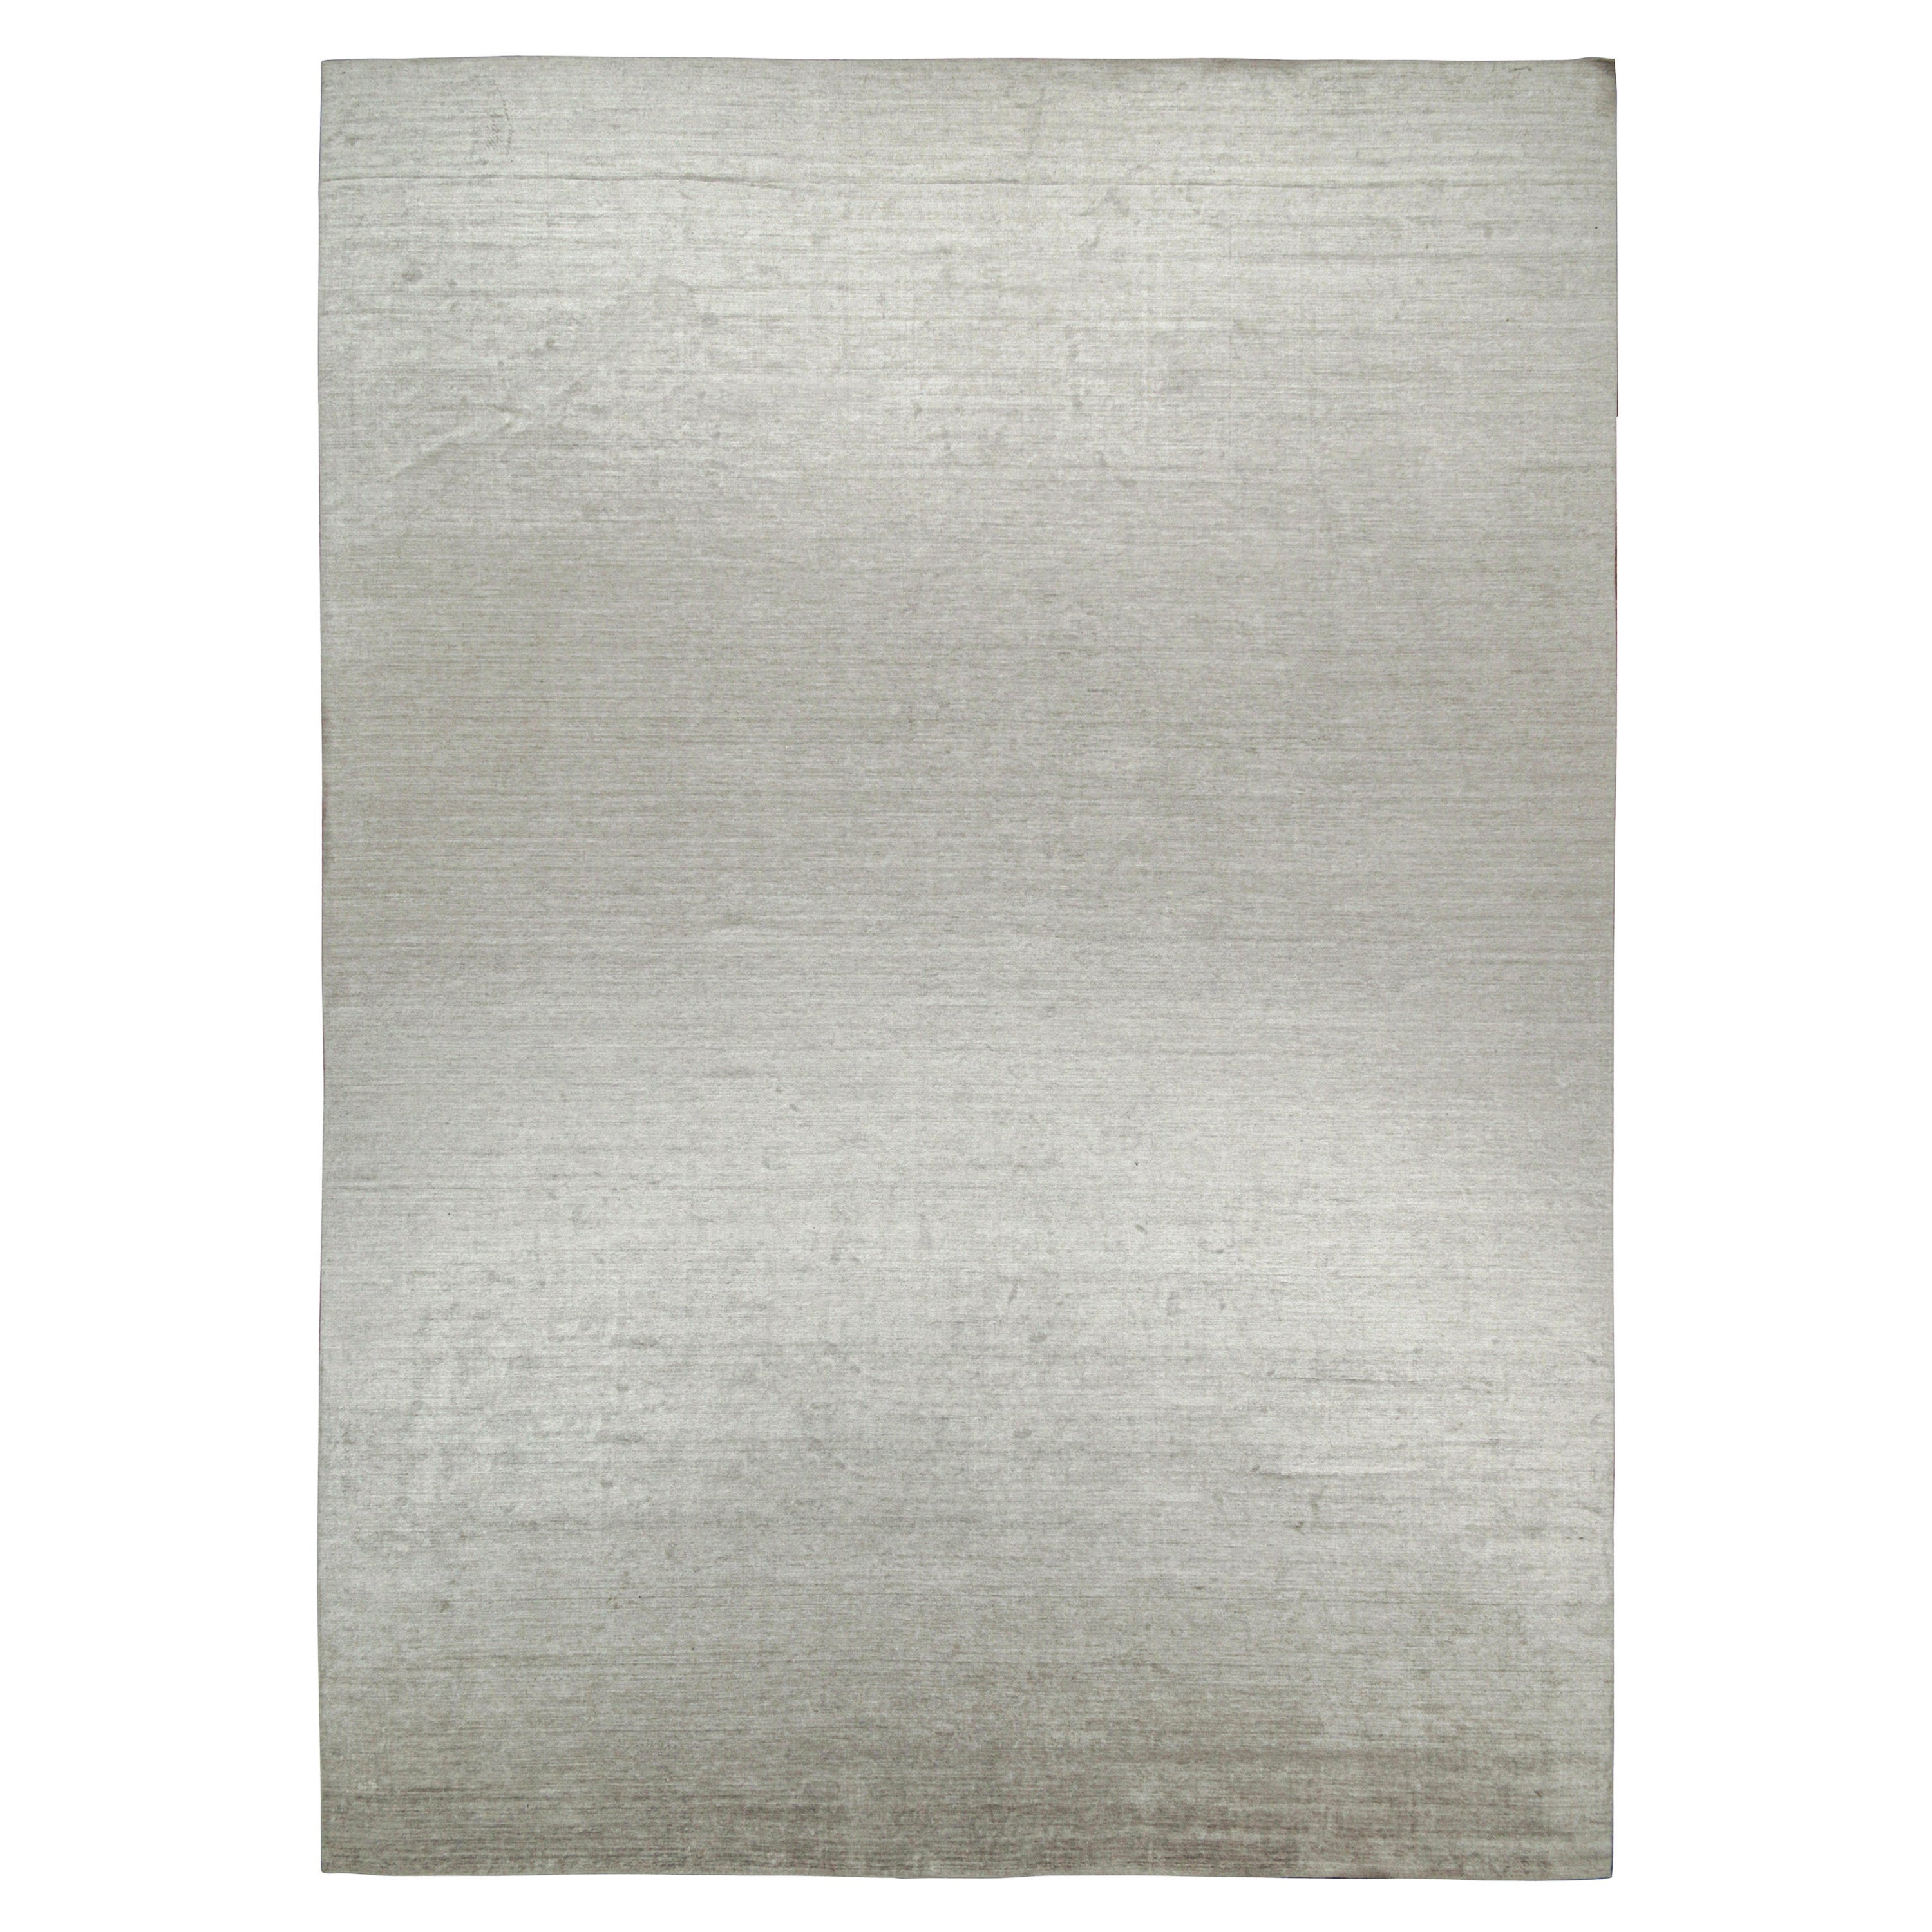 Rug & Kilim's Modern Rug in Solid Gray and Off-White Striae (tapis moderne en gris uni et rayures blanc cassé)